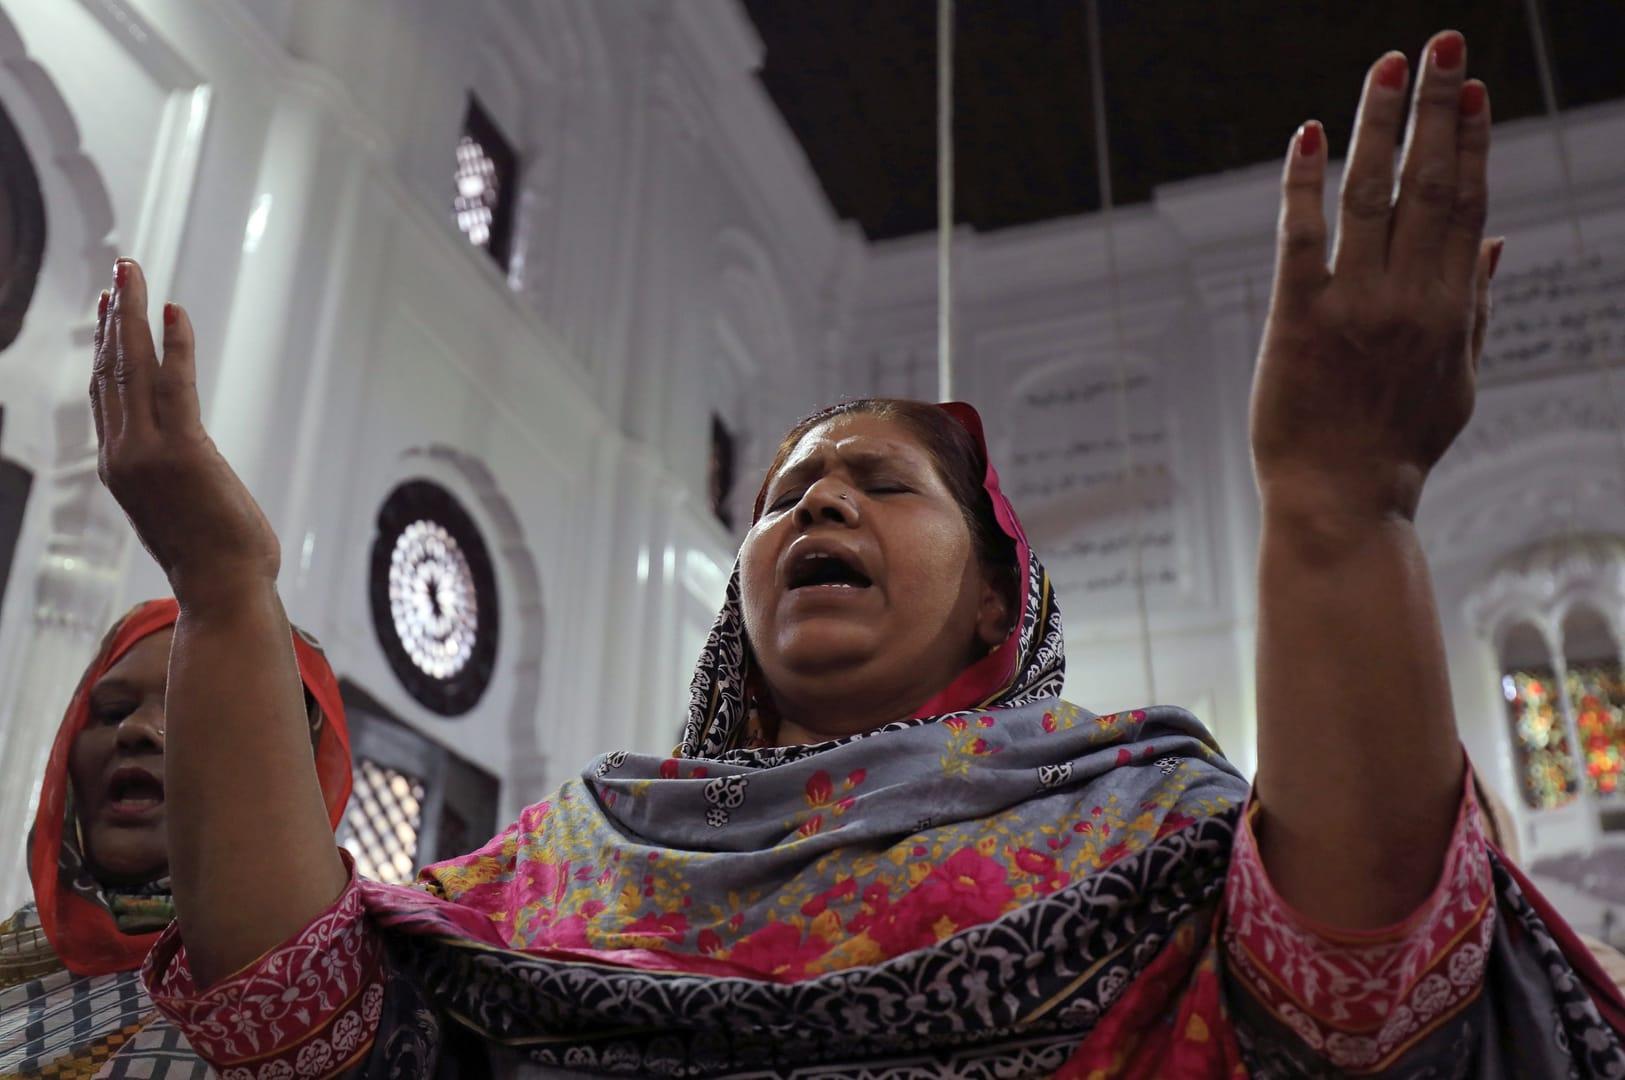 Pakistani bishop: ‘We don’t have resources’ to deal with inflation